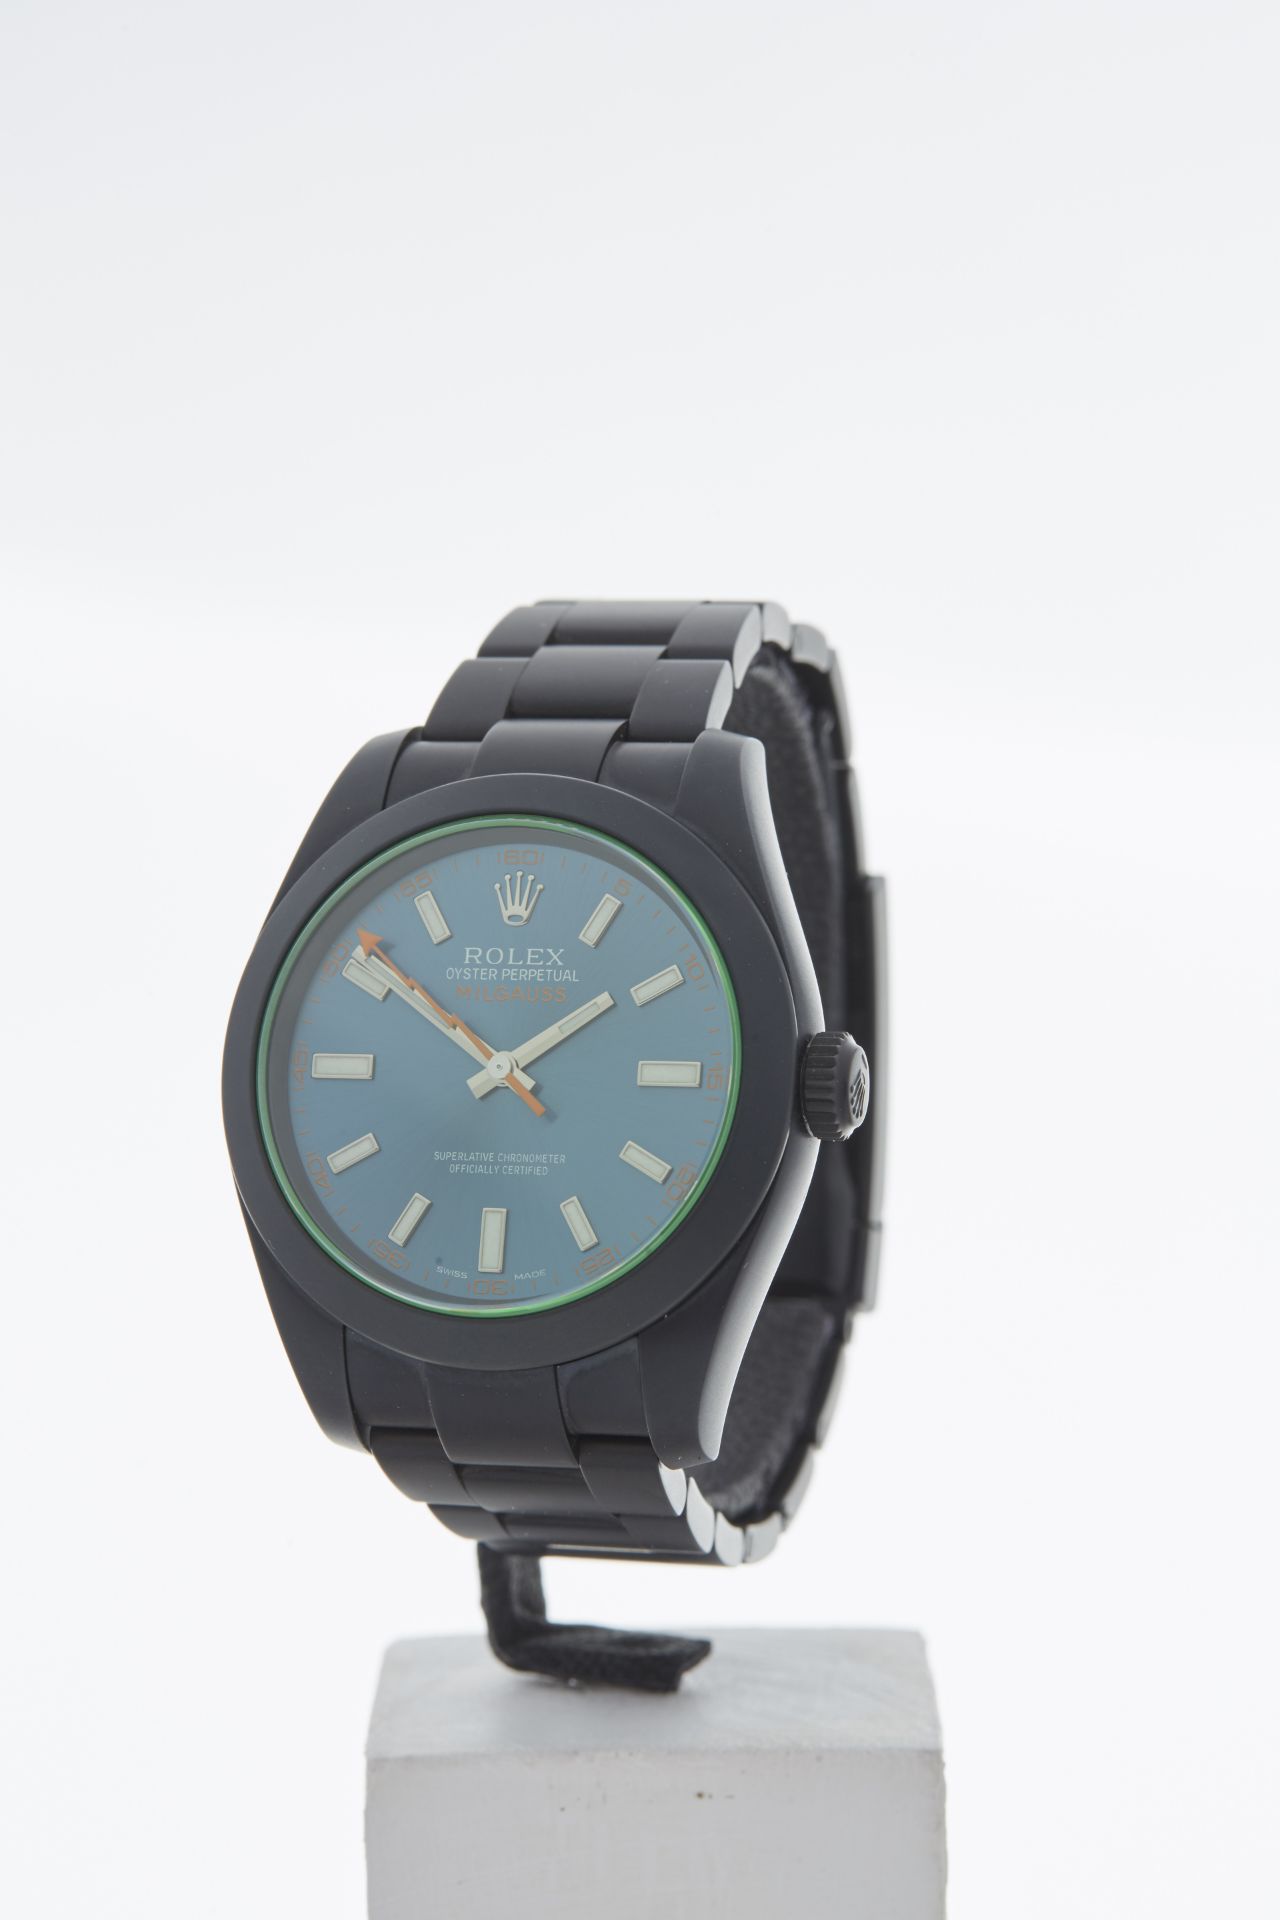 Rolex Milgauss Green Glass 40mm Black DLC Coated Stainless Steel 116400GV - Image 3 of 16